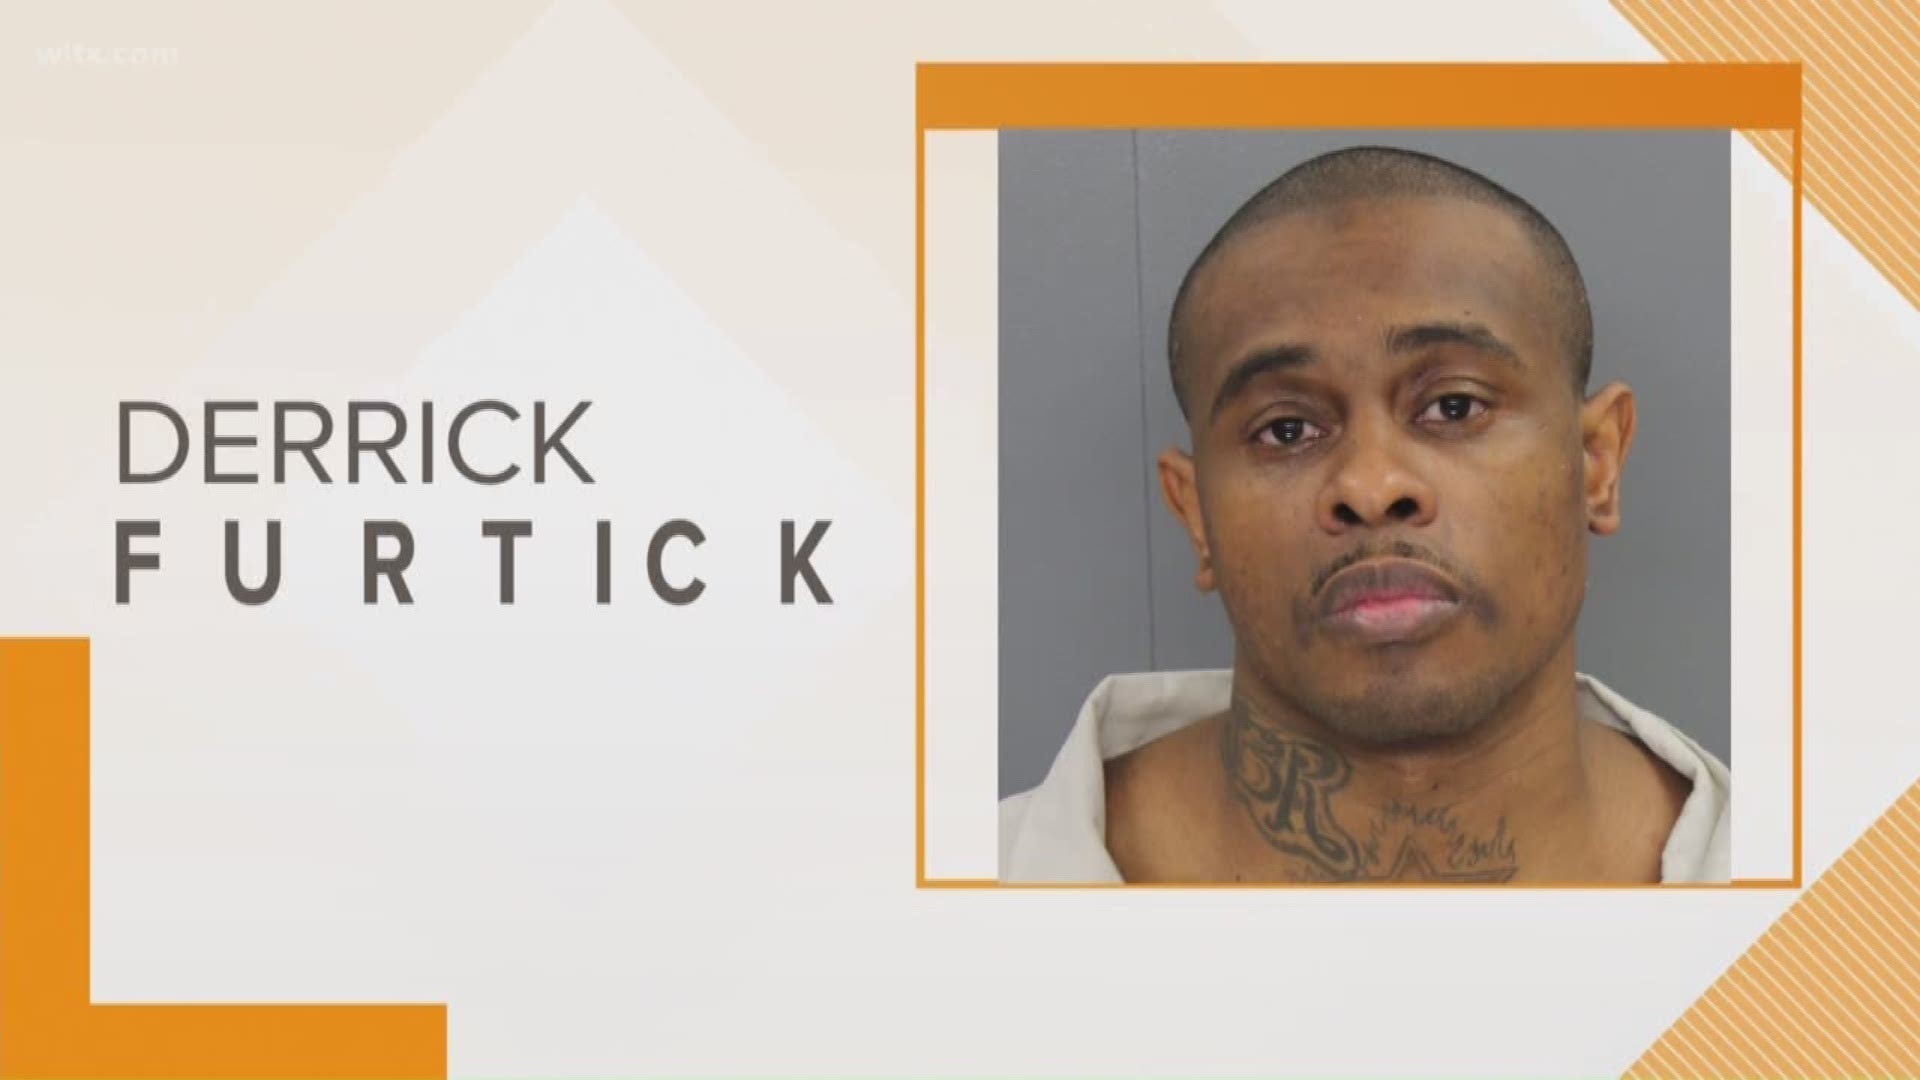 Derrick Furtick was serving a 30-year sentence for a kidnapping conviction in Orangeburg County last year.